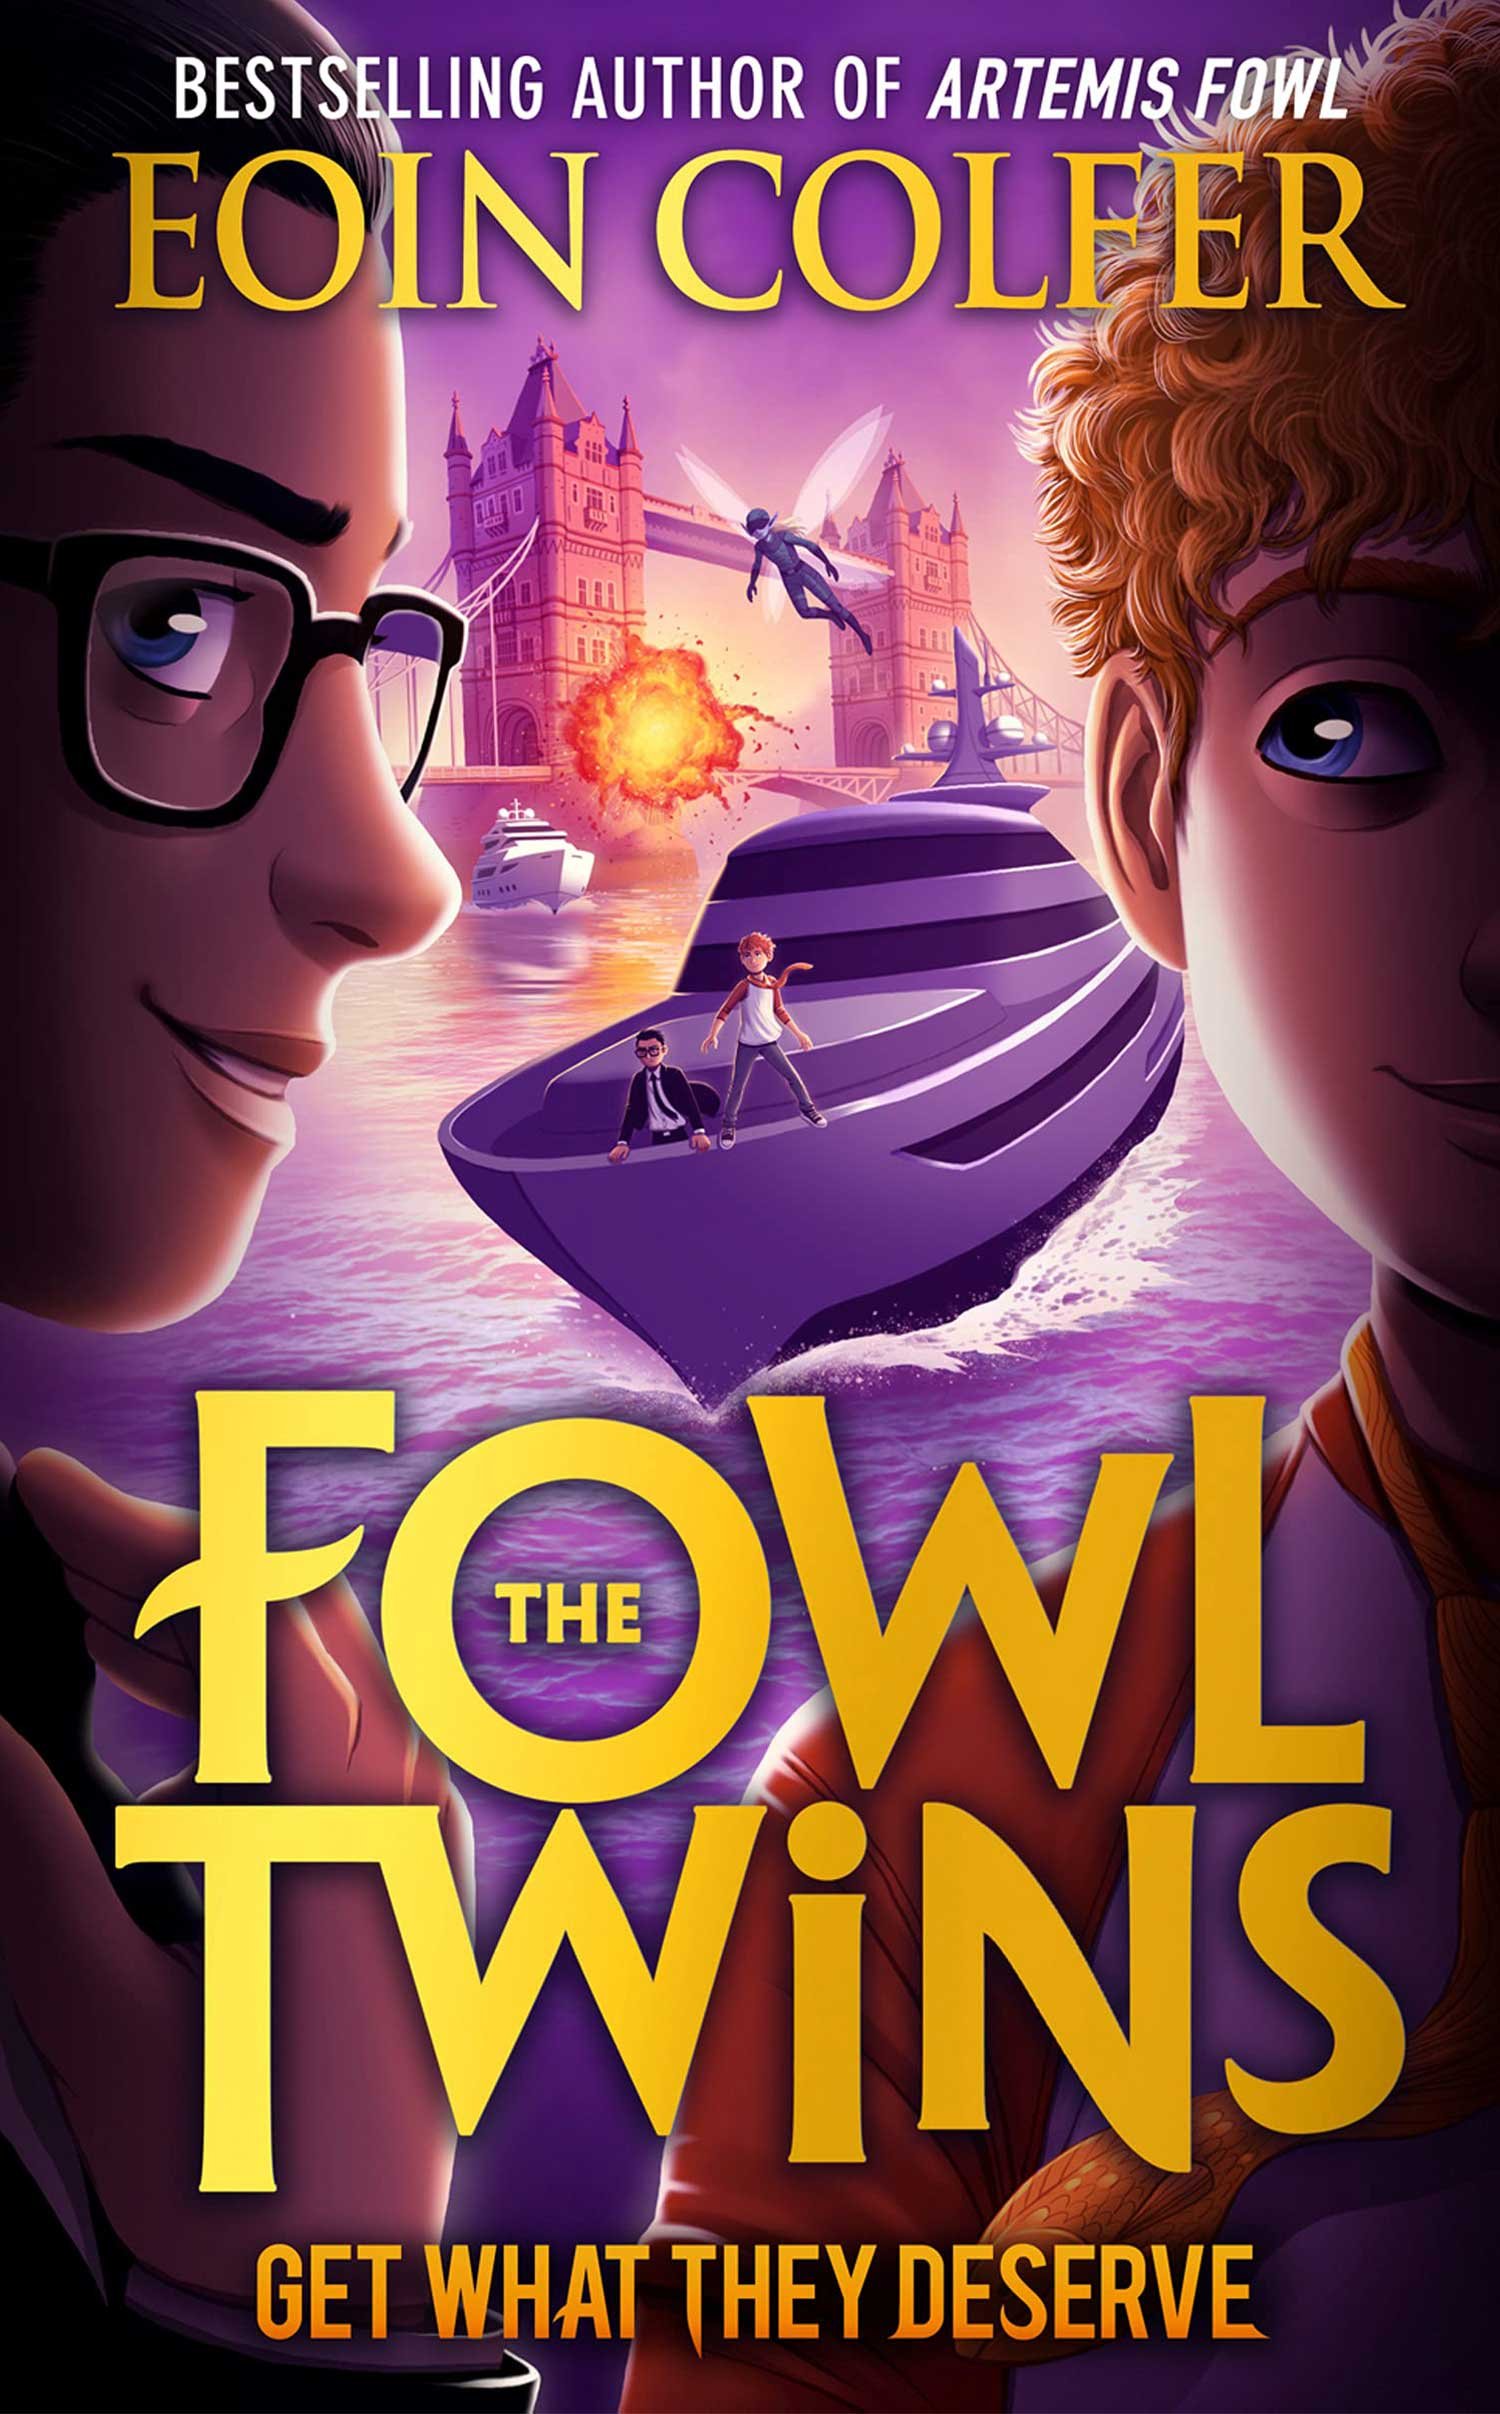 The Fowl Twins Get What They Deserve by Eoin Colfer - Artemis Fowl, The Fowl  Twins - Artemis Fowl, Disney Books